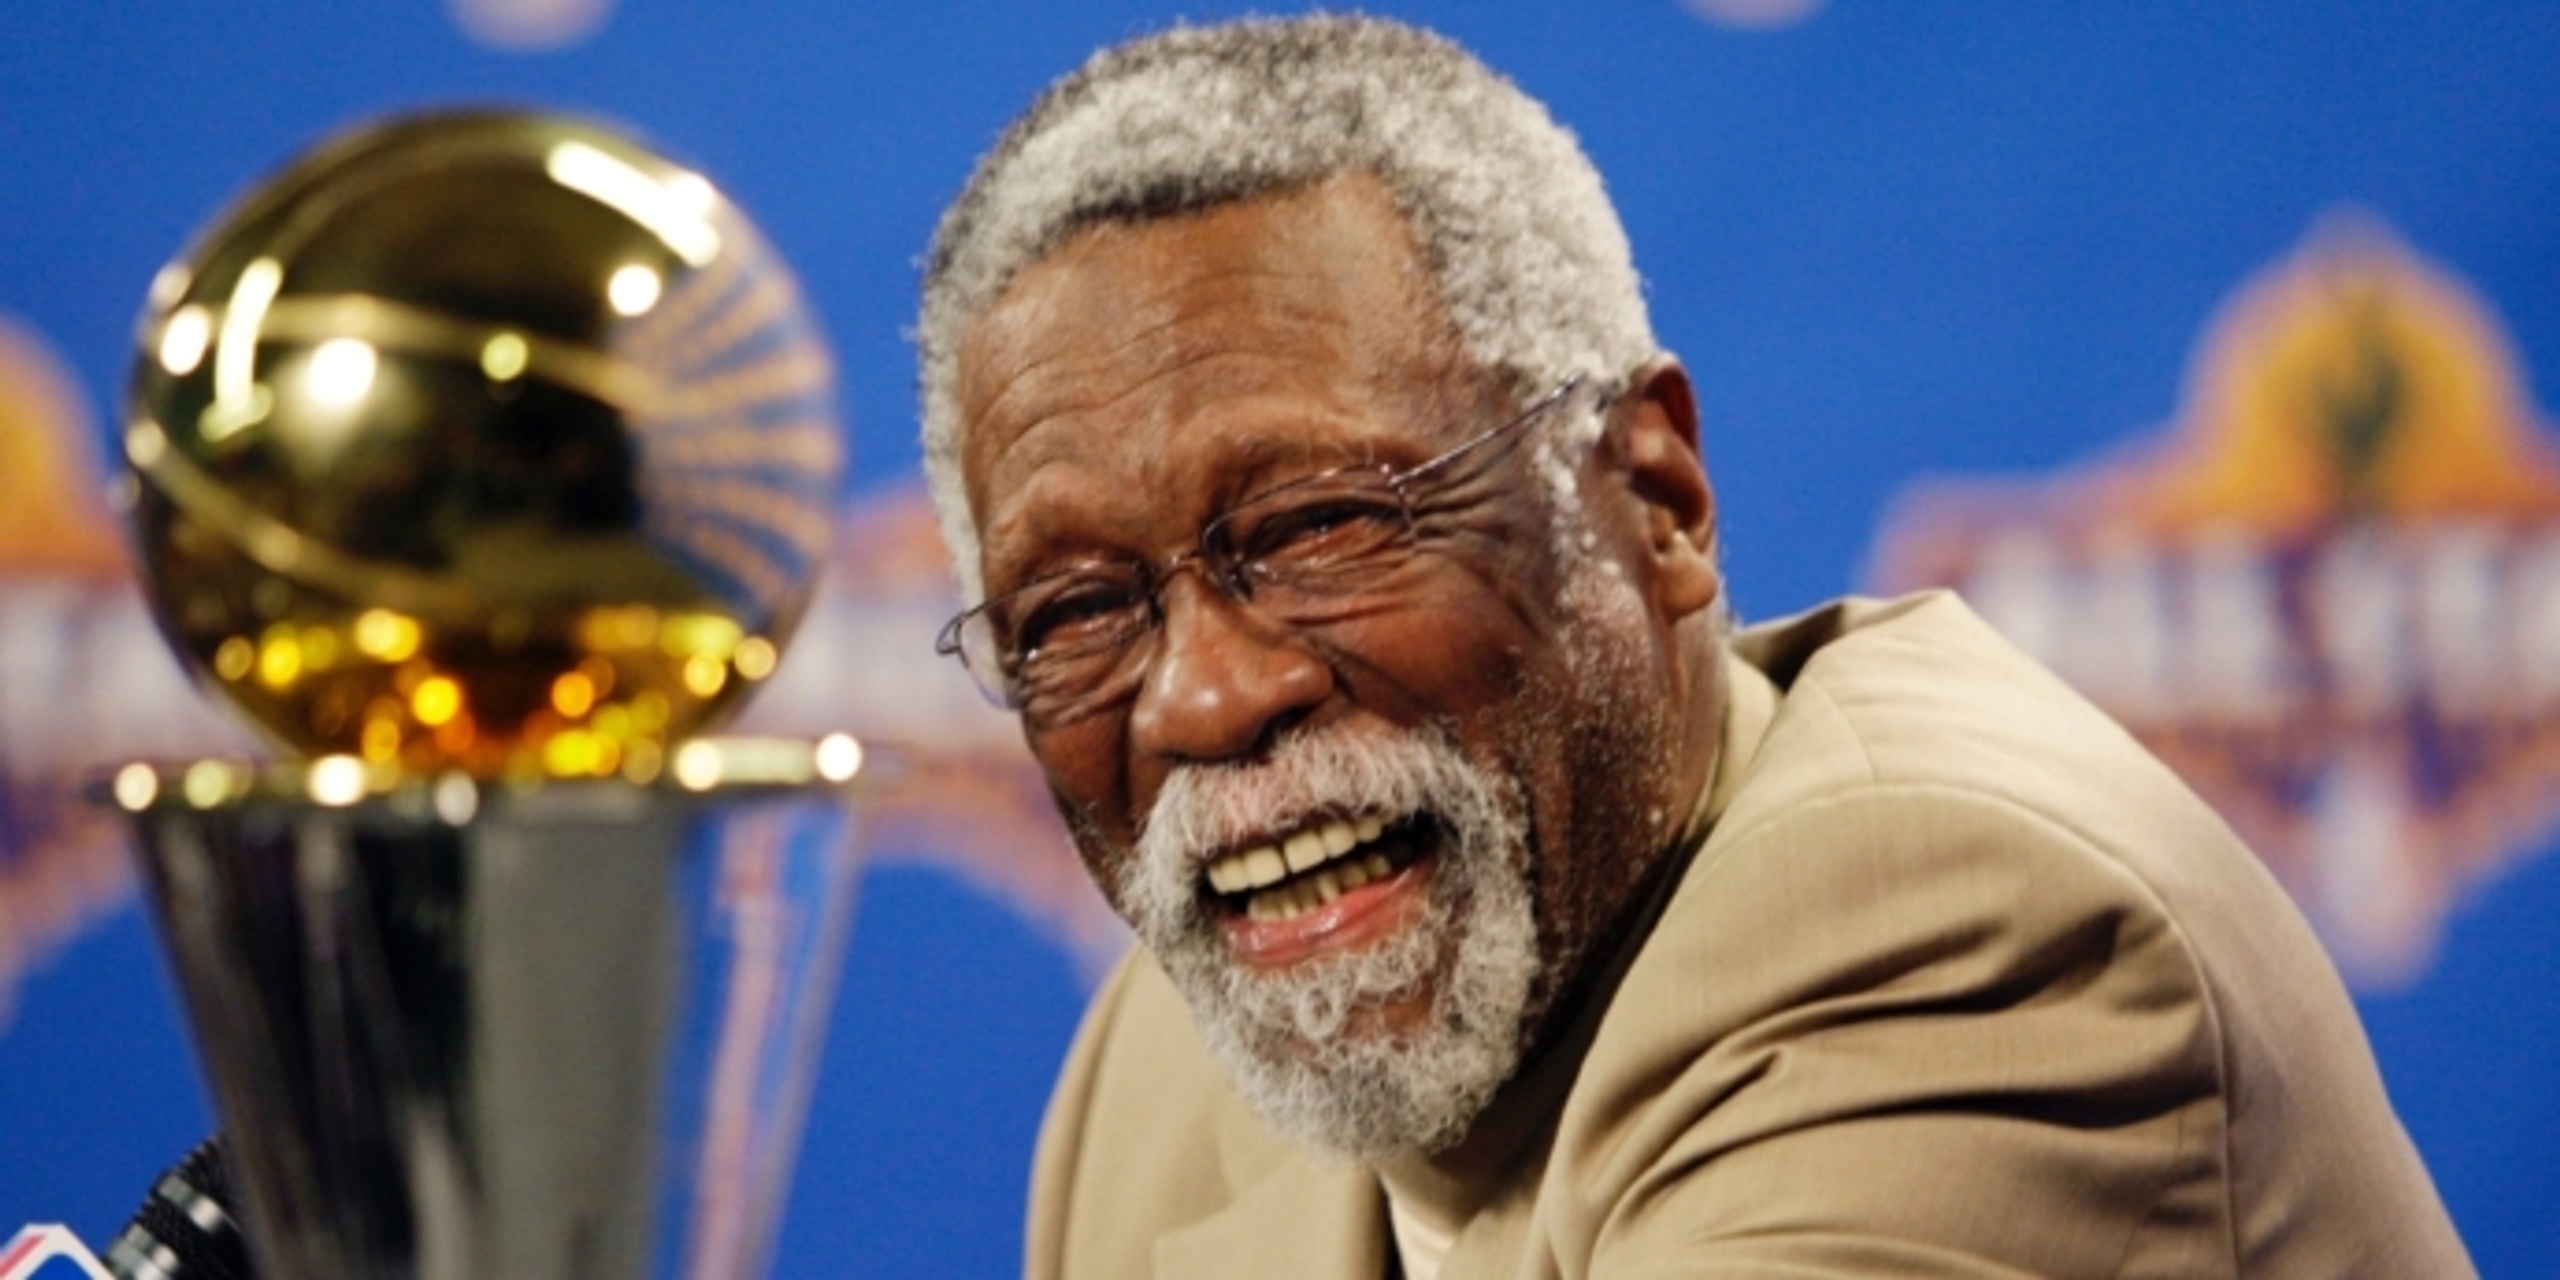 NBA and Celtics legend Bill Russell passes away at 88